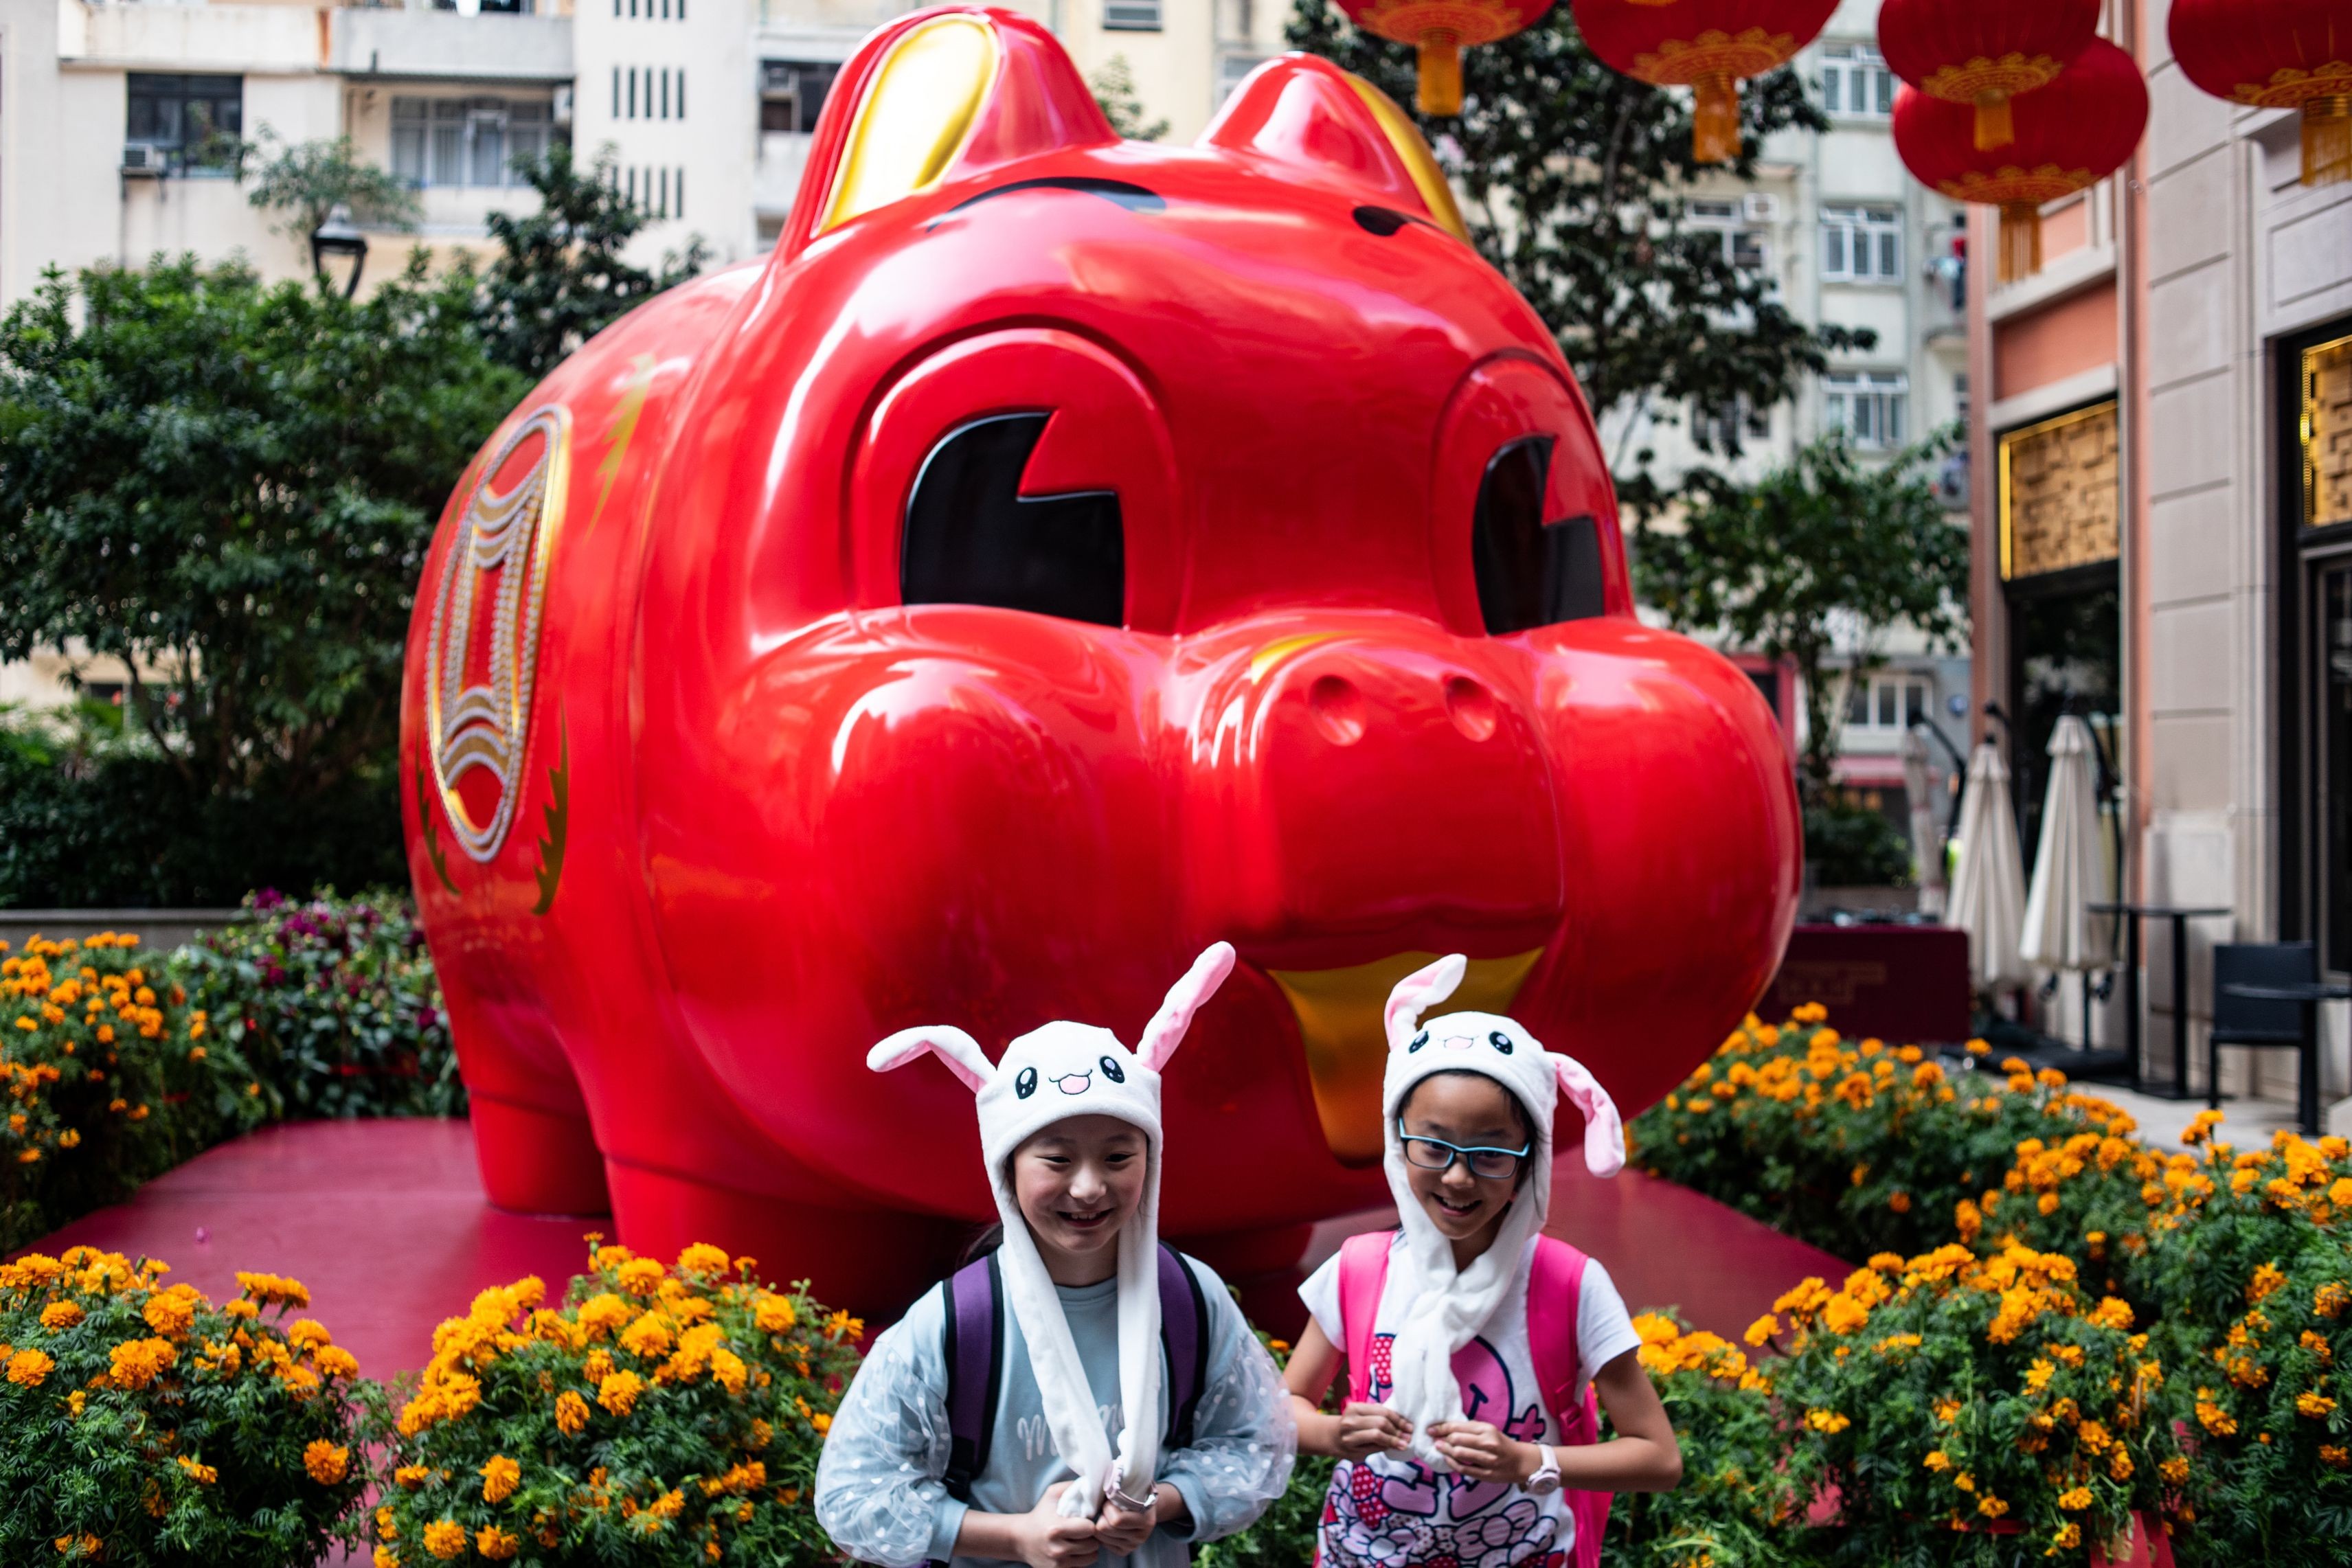 Children out and about for the Lunar New Year festivities. Photo: AFP